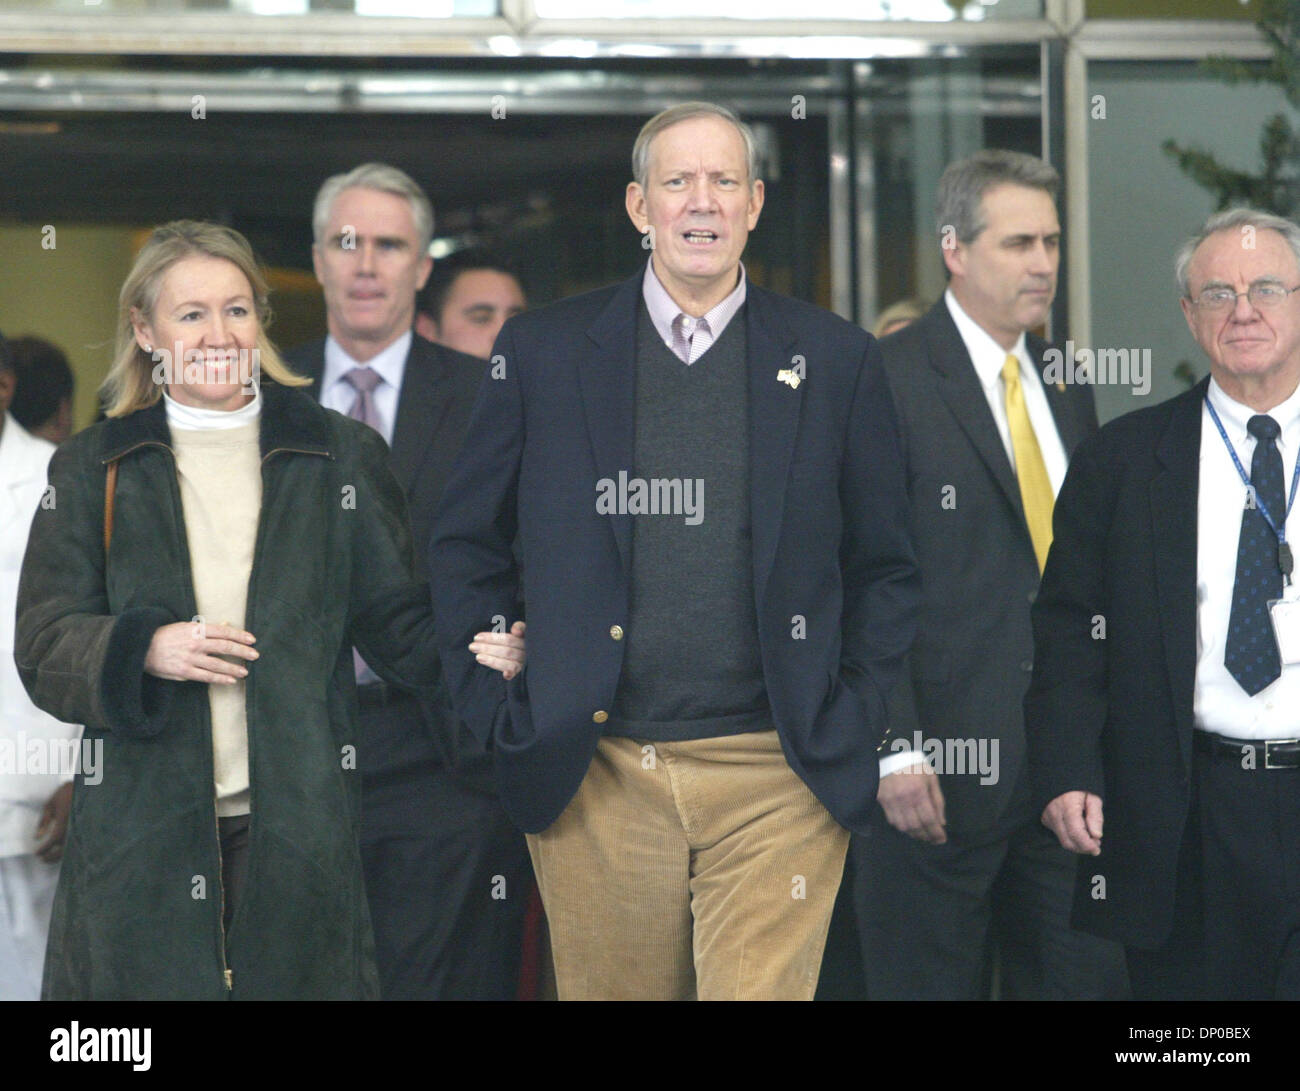 Mar 06, 2006; Manhattan, N.Y., U.S.A; Governor GEORGE PATAKI And his wife LIBBY leaving the  Columbia Presbyterian Hospital in Manhattan after having surgery. Mandatory Credit: Photo by Mariela Lombard/ZUMA Press. (©) Copyright 2006 by Mariela Lombard Stock Photo